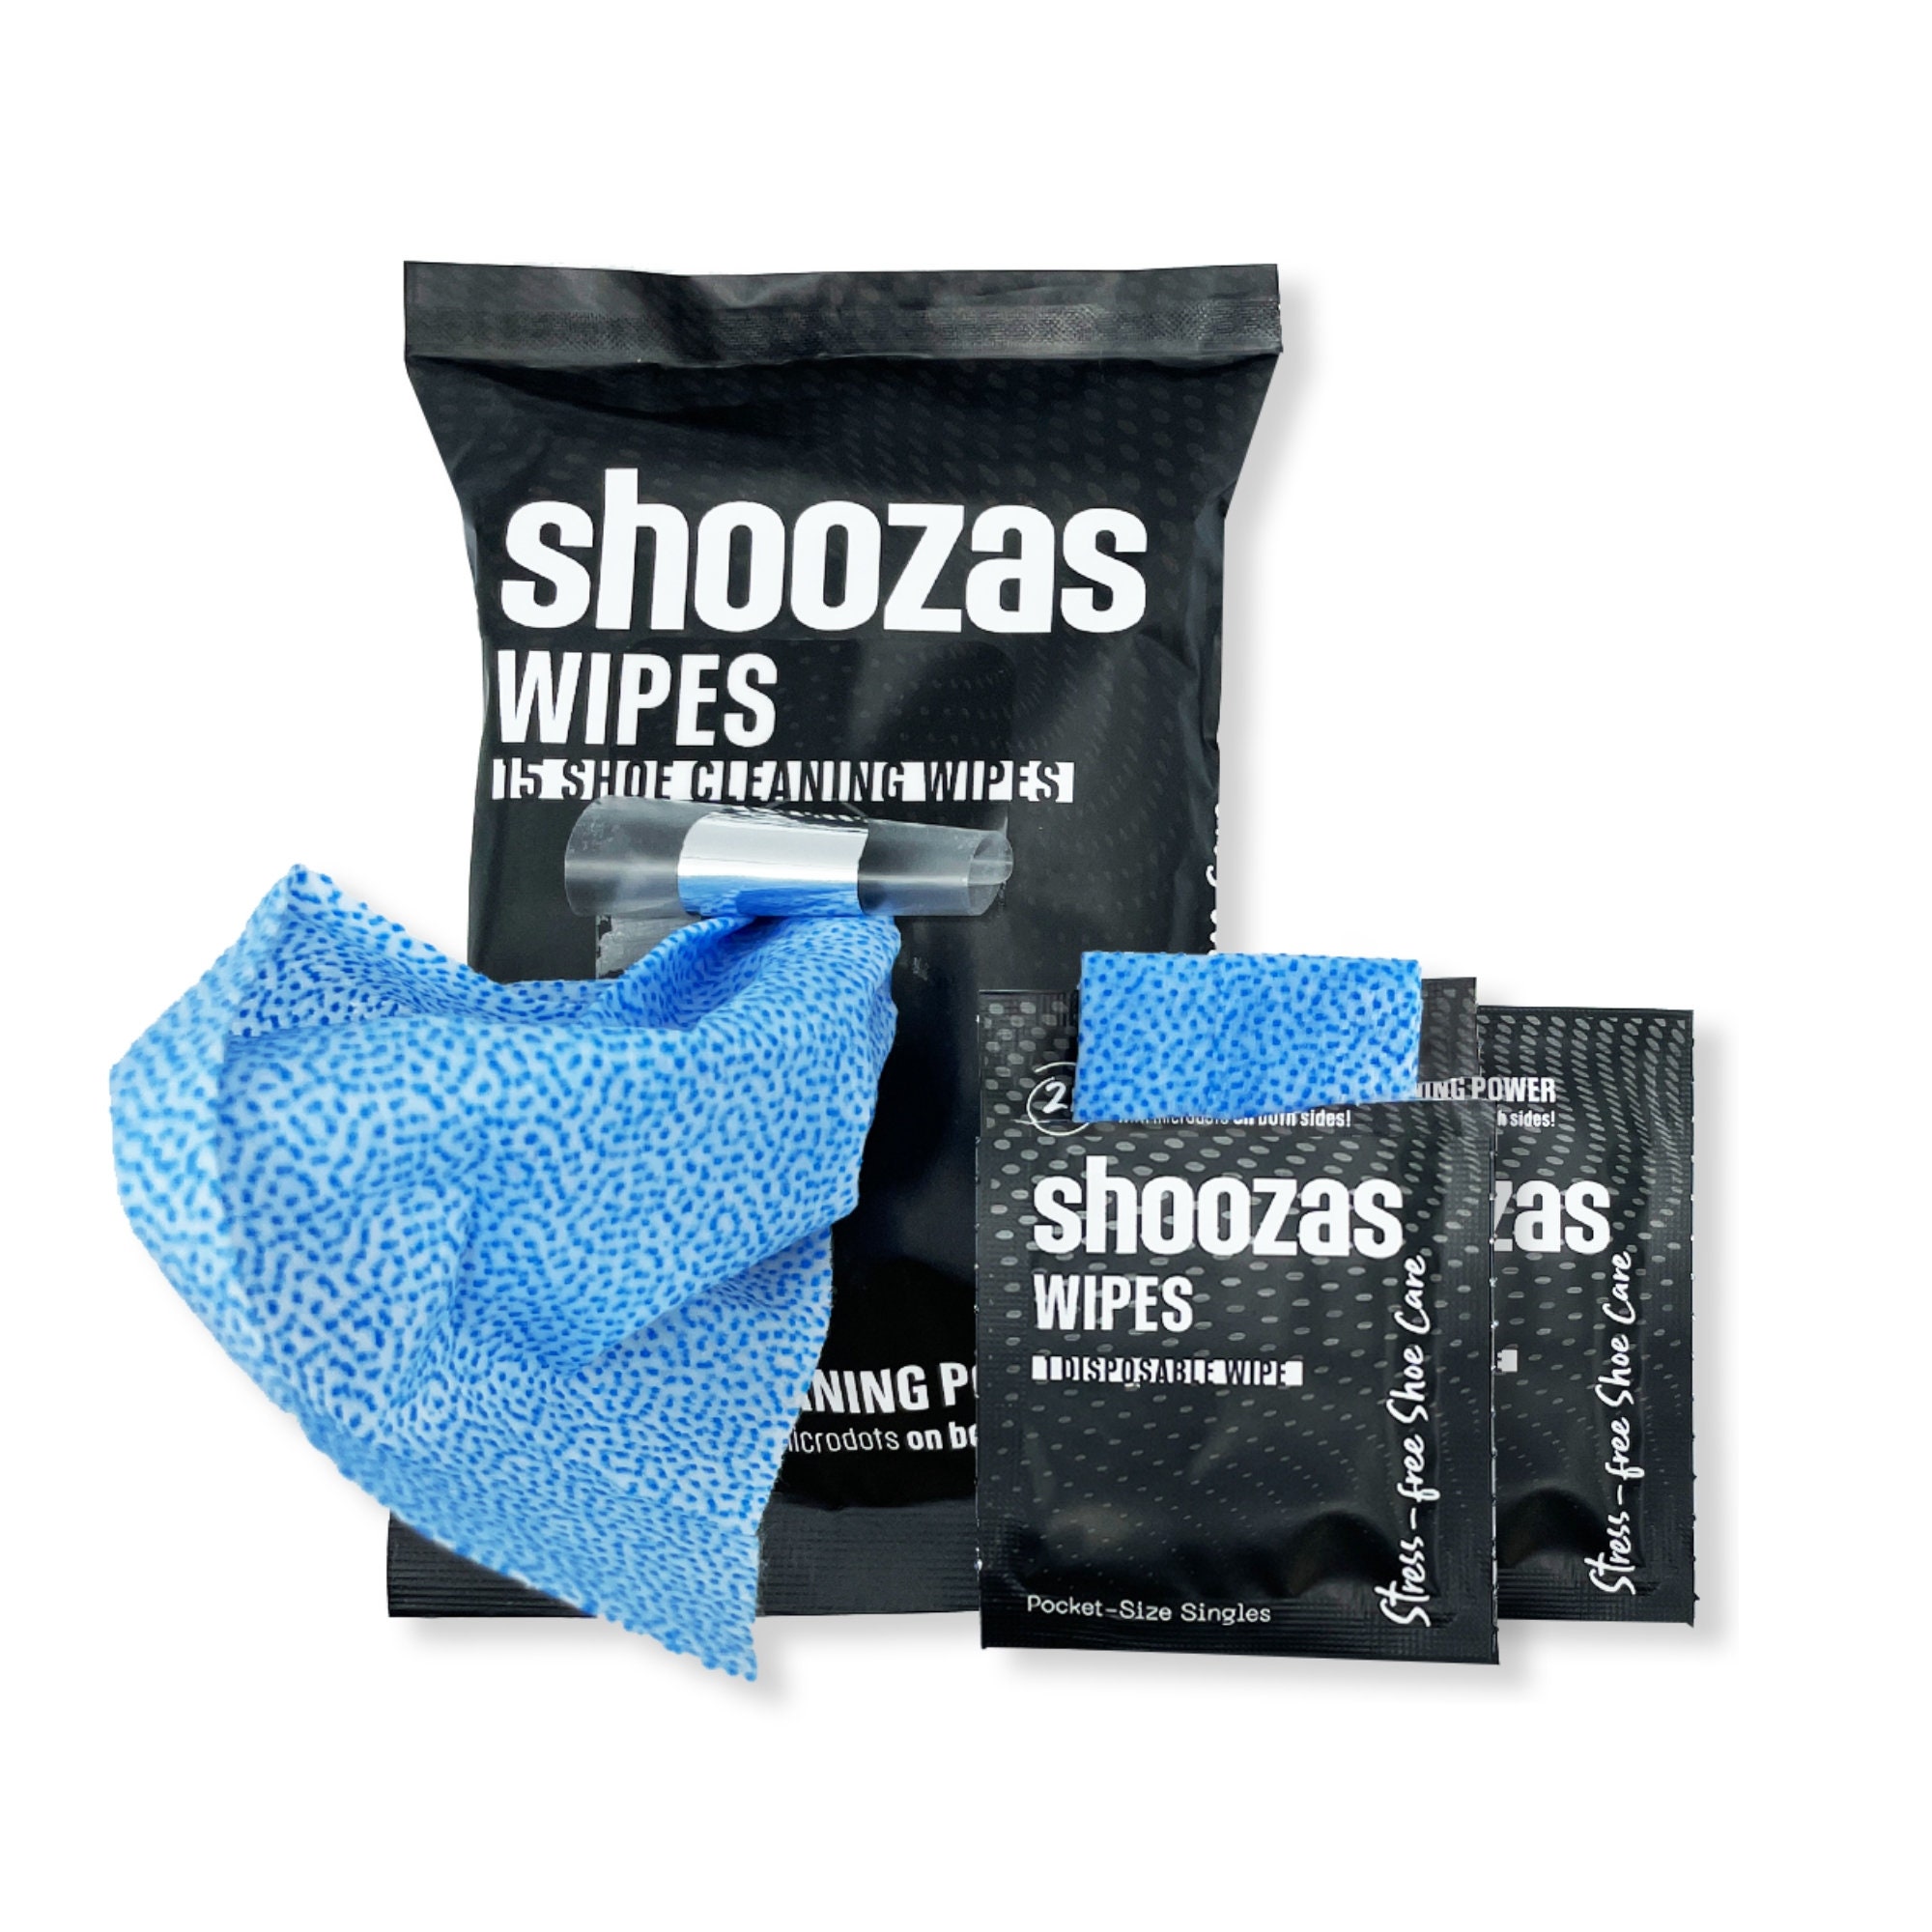 Shoozas Shoe Protector Spray (9.5 oz.) - Water & Stain Repellent, Safe on Suede, Nubuck, Canvas and More